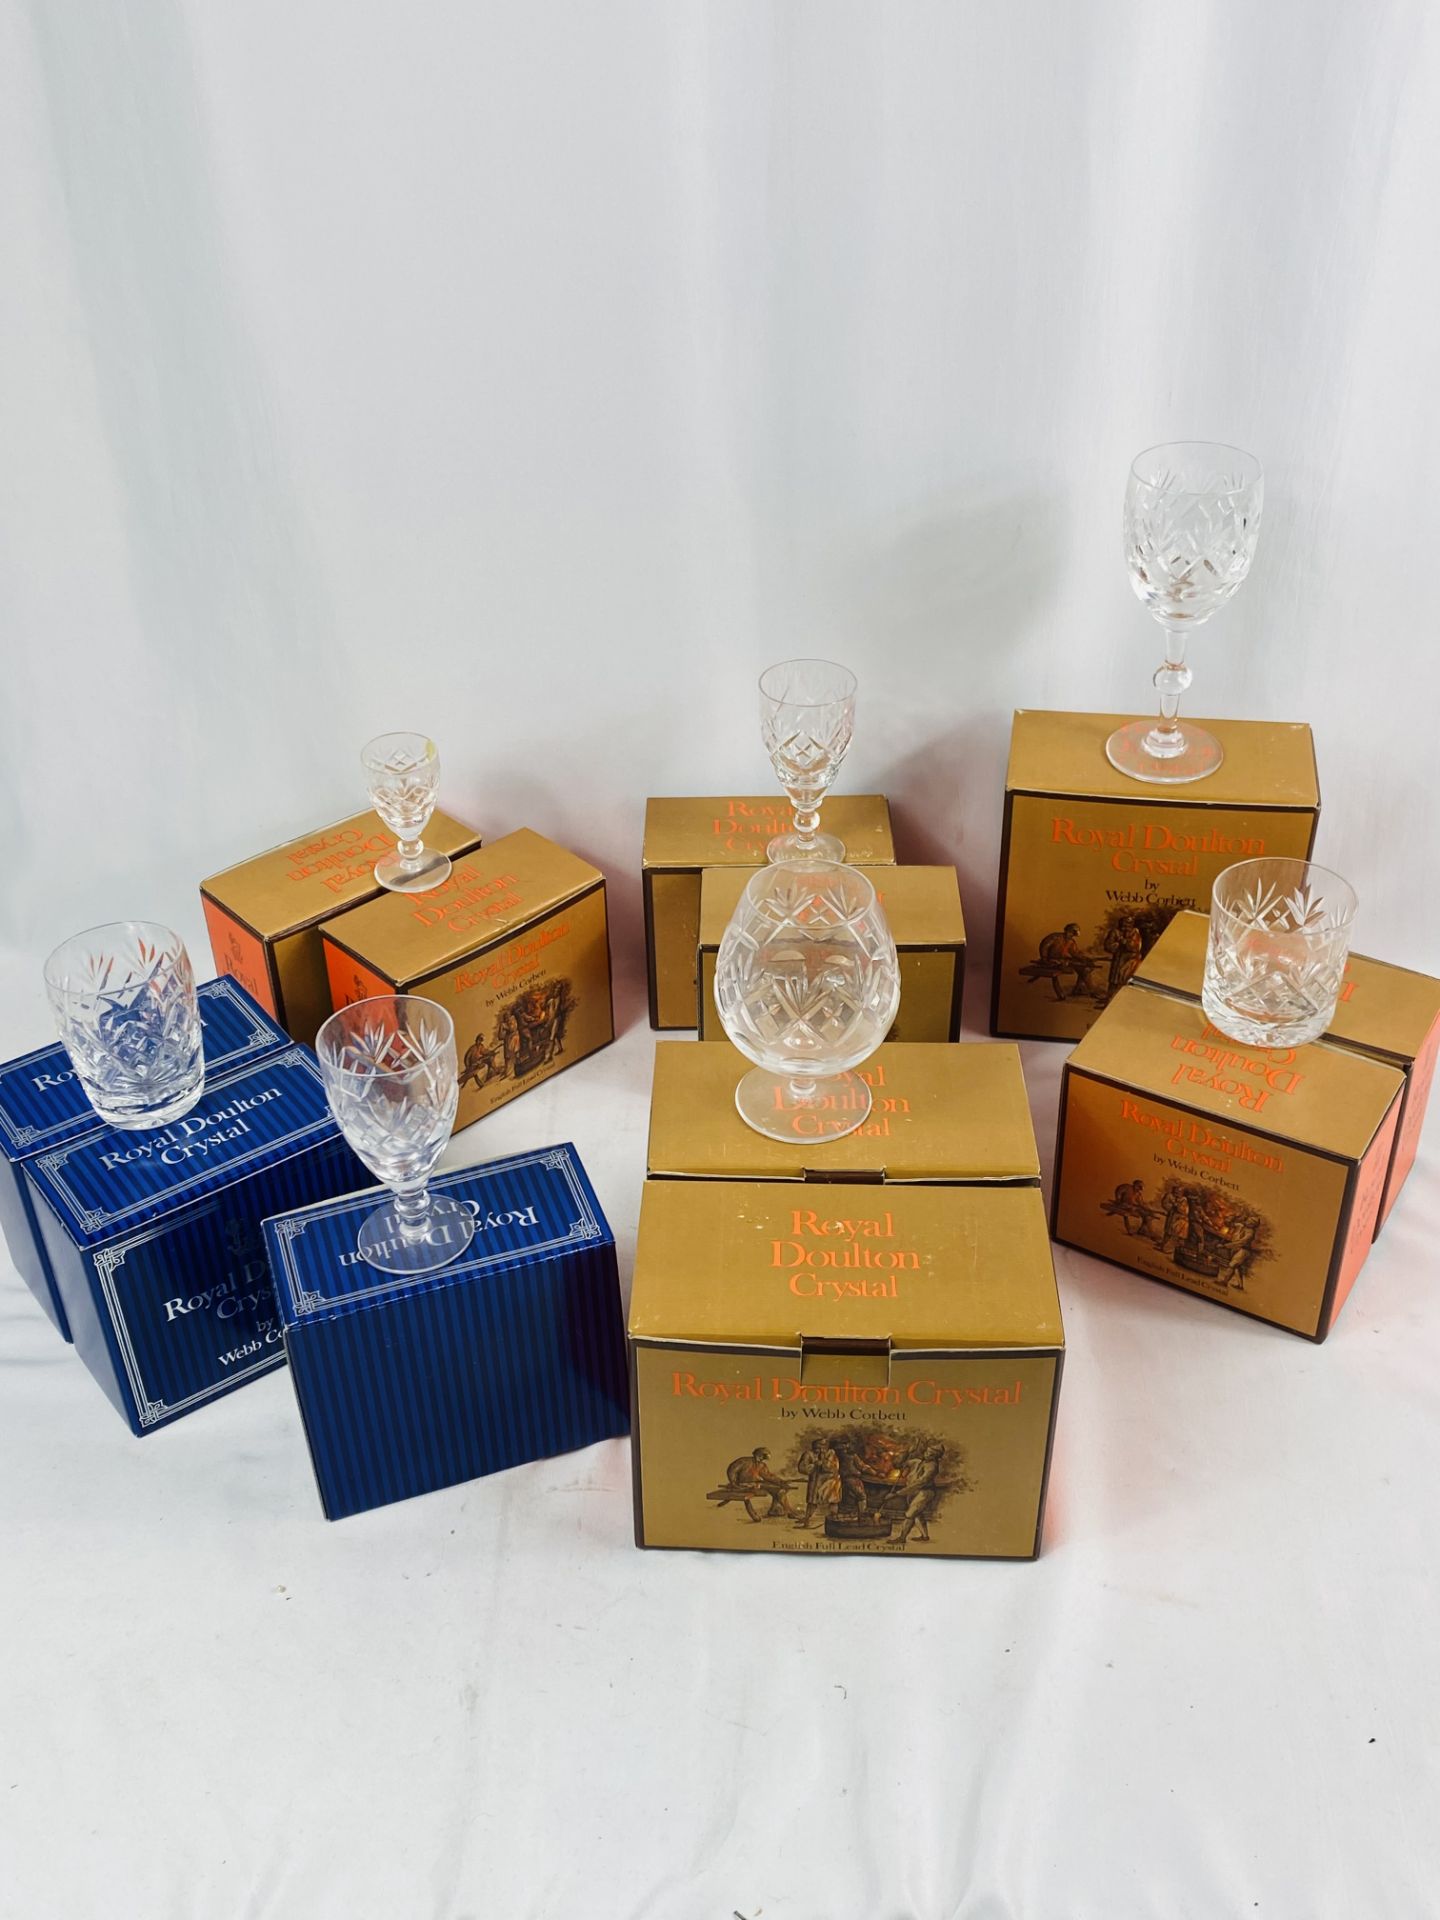 Twelve boxed items of Royal Doulton crystal